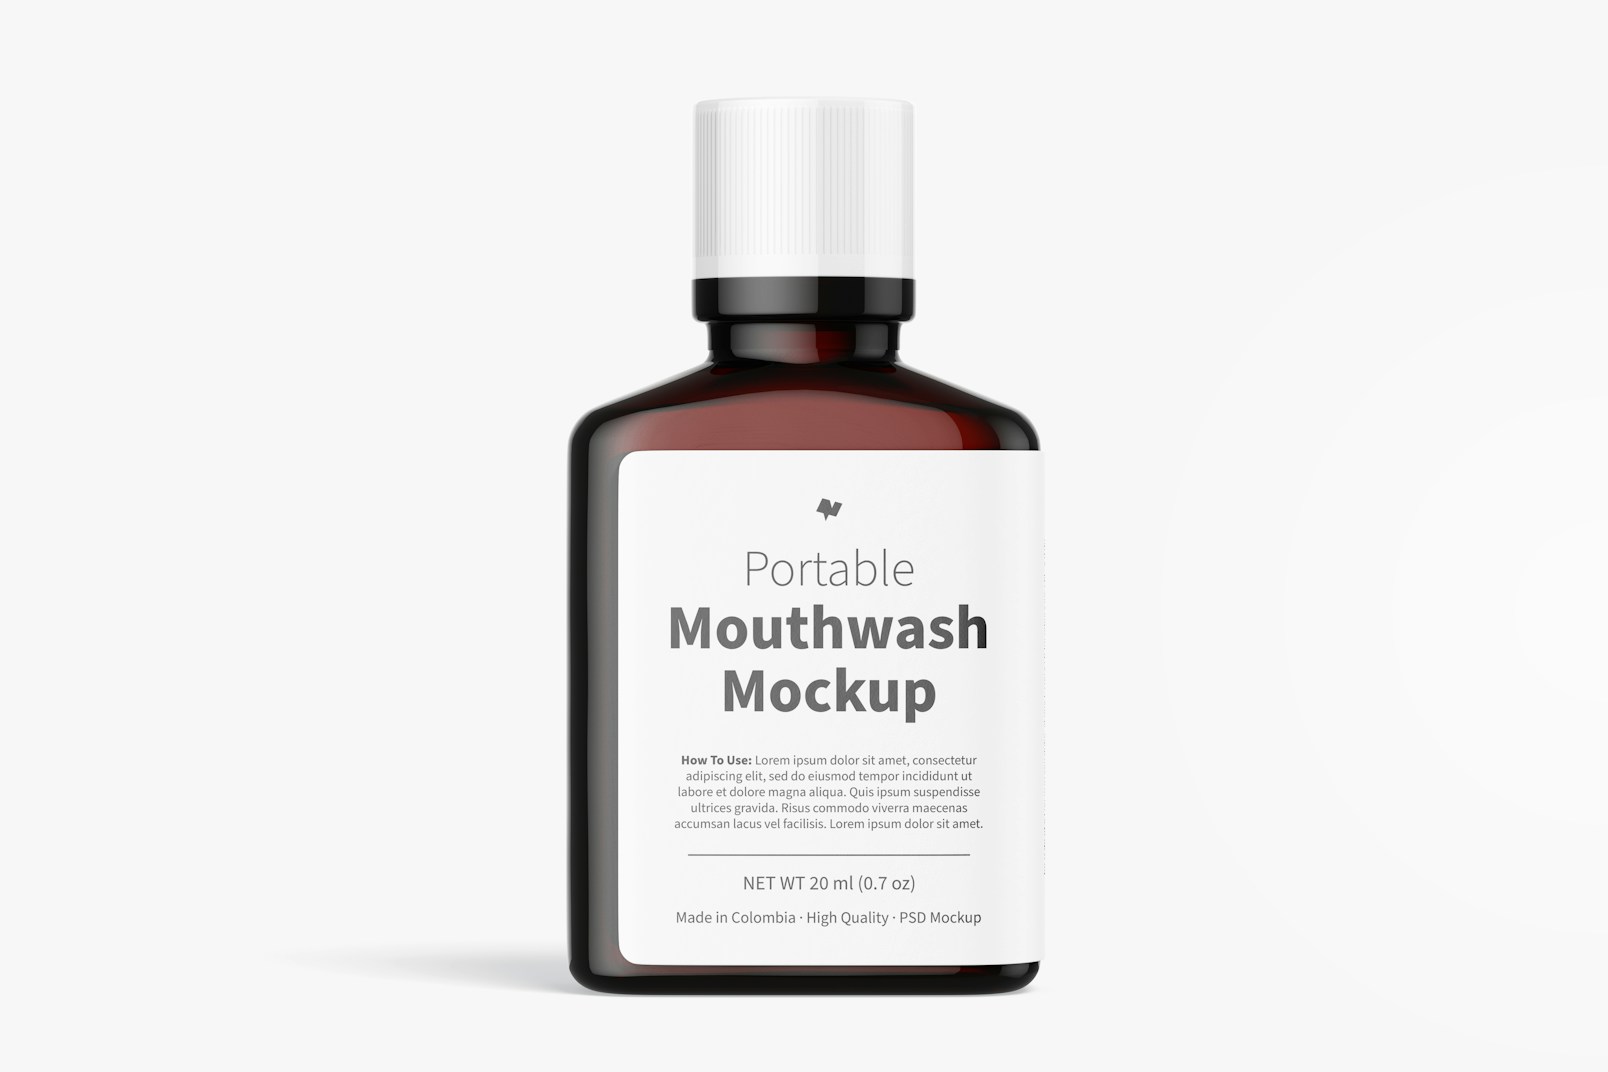 Portable Mouthwash with Label Mockup, Front View